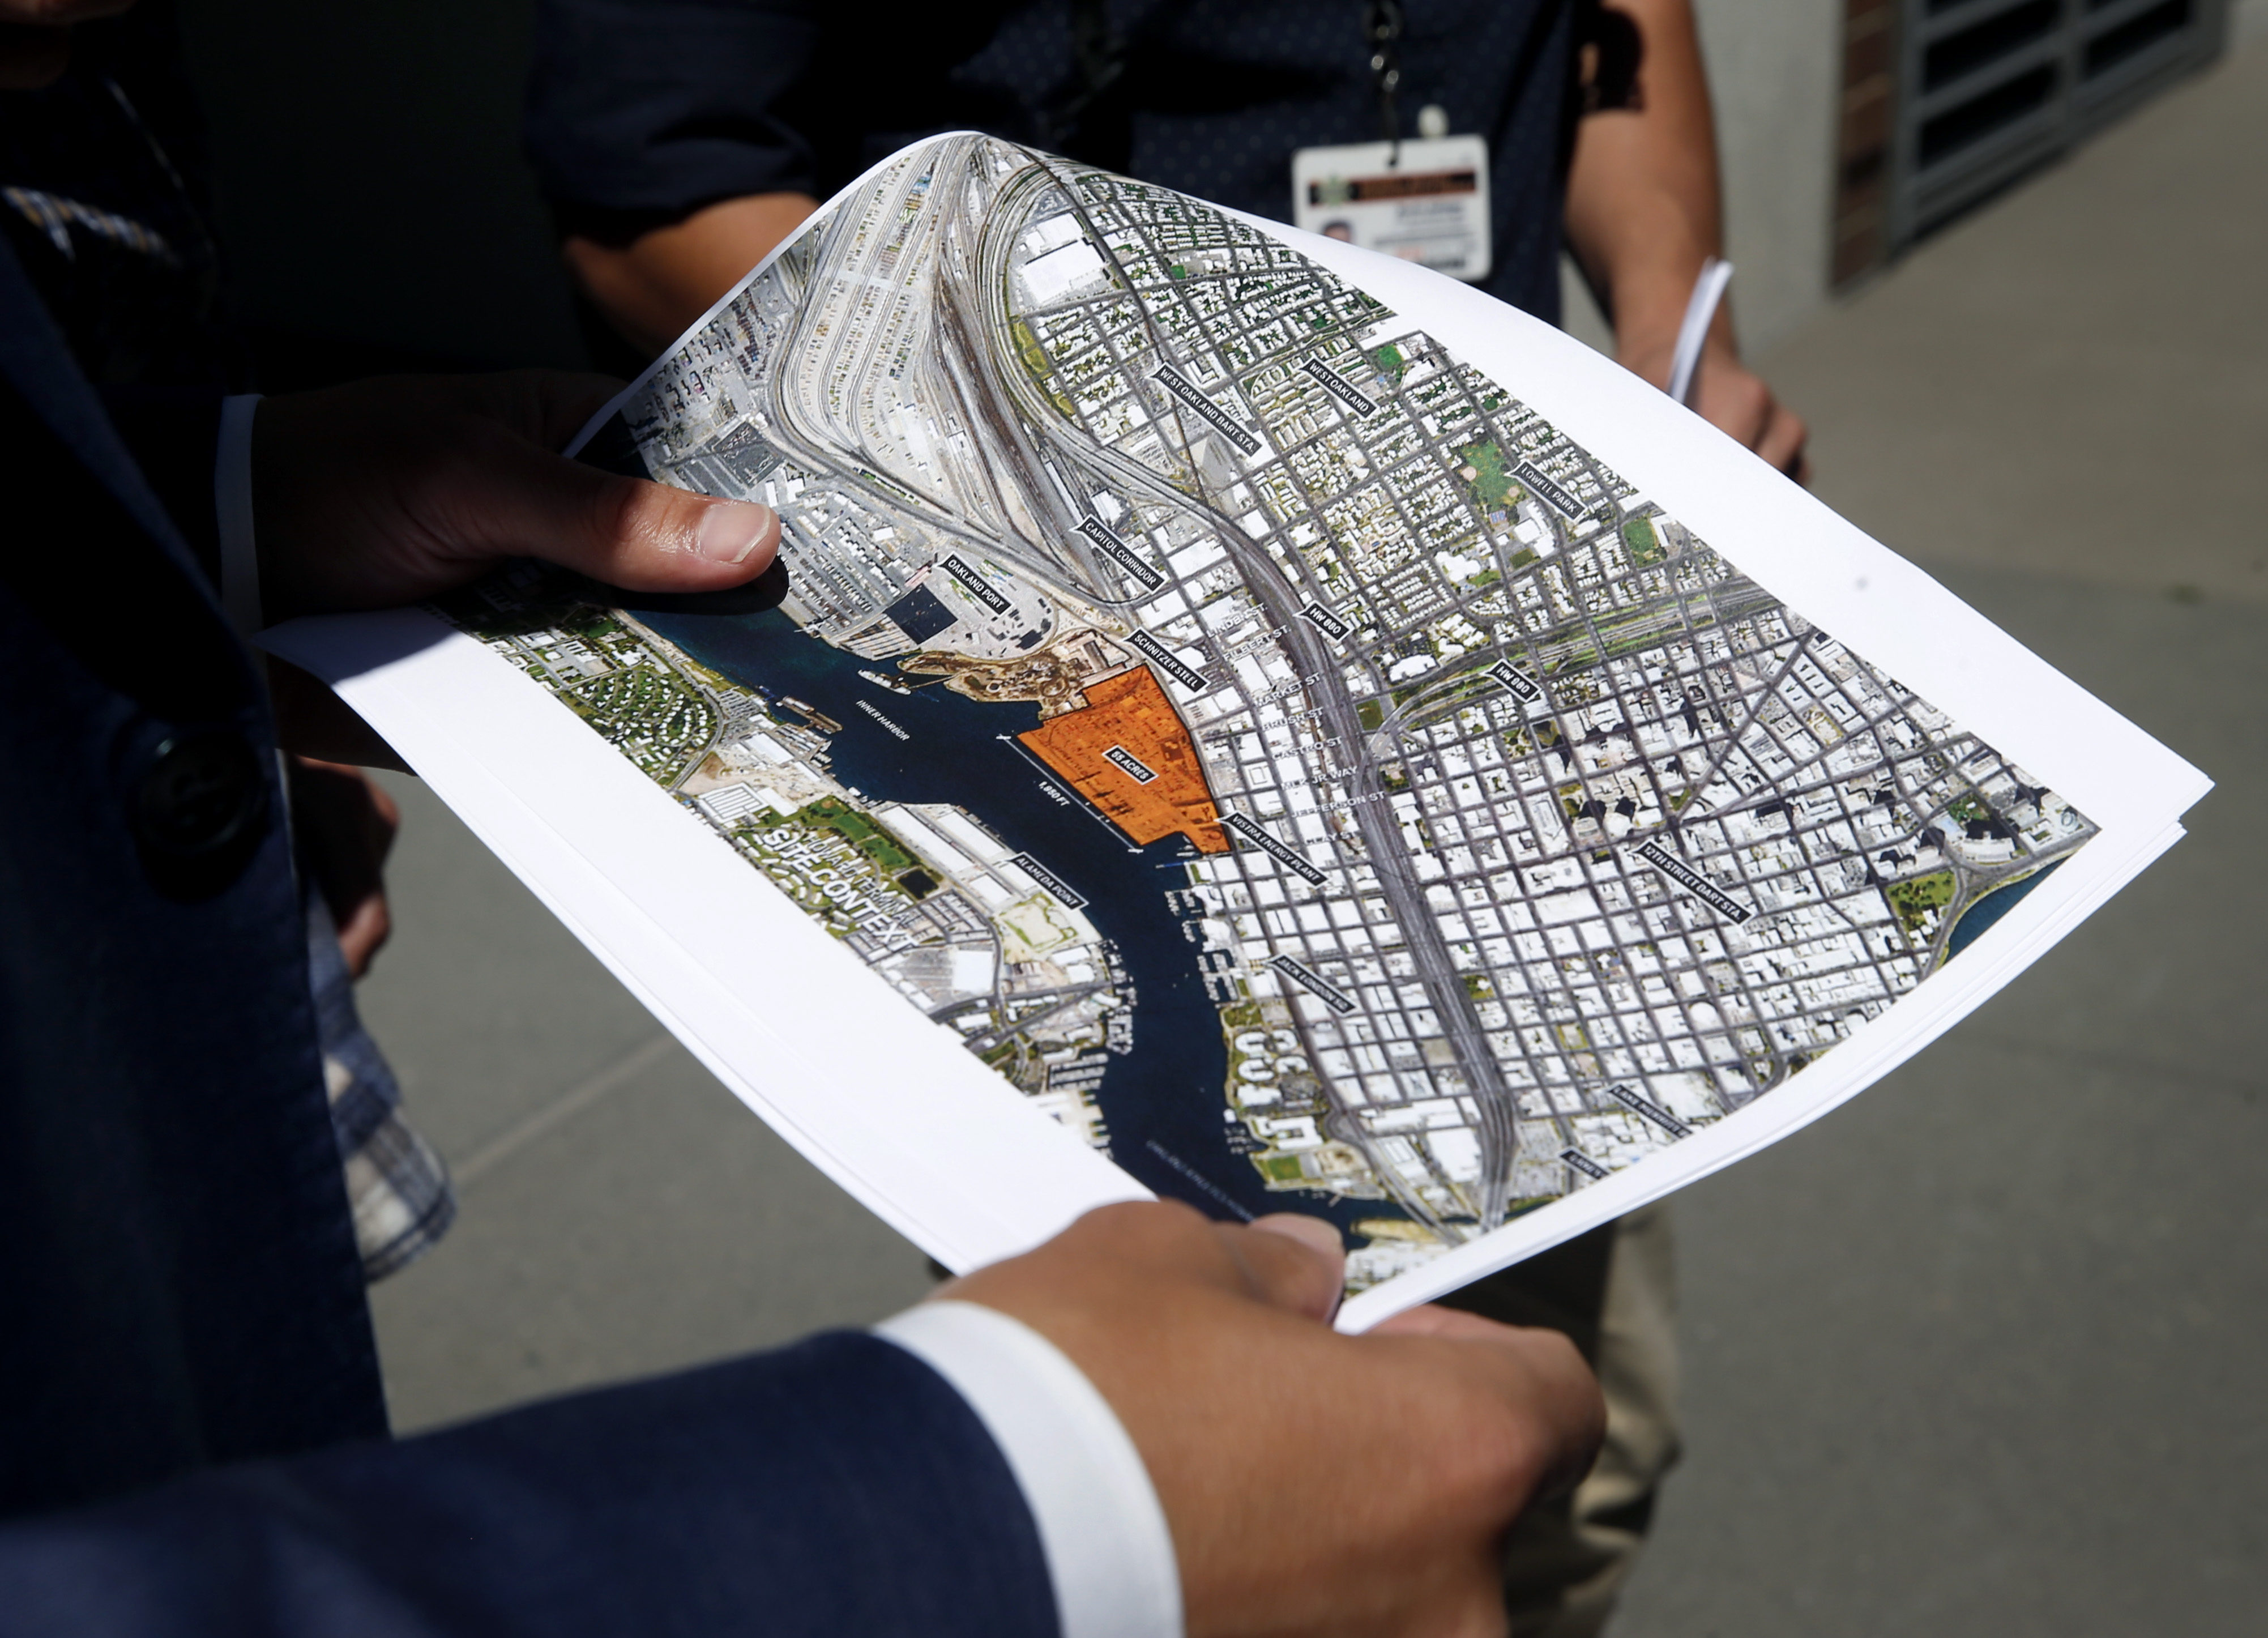 Oakland A’s President Dave Kaval displays a map of the Howard Terminal site and surrounding area in Oakland, Calif. on Tuesday, Sept. 3, 2019 where the baseball team is hoping to build its new stadium.